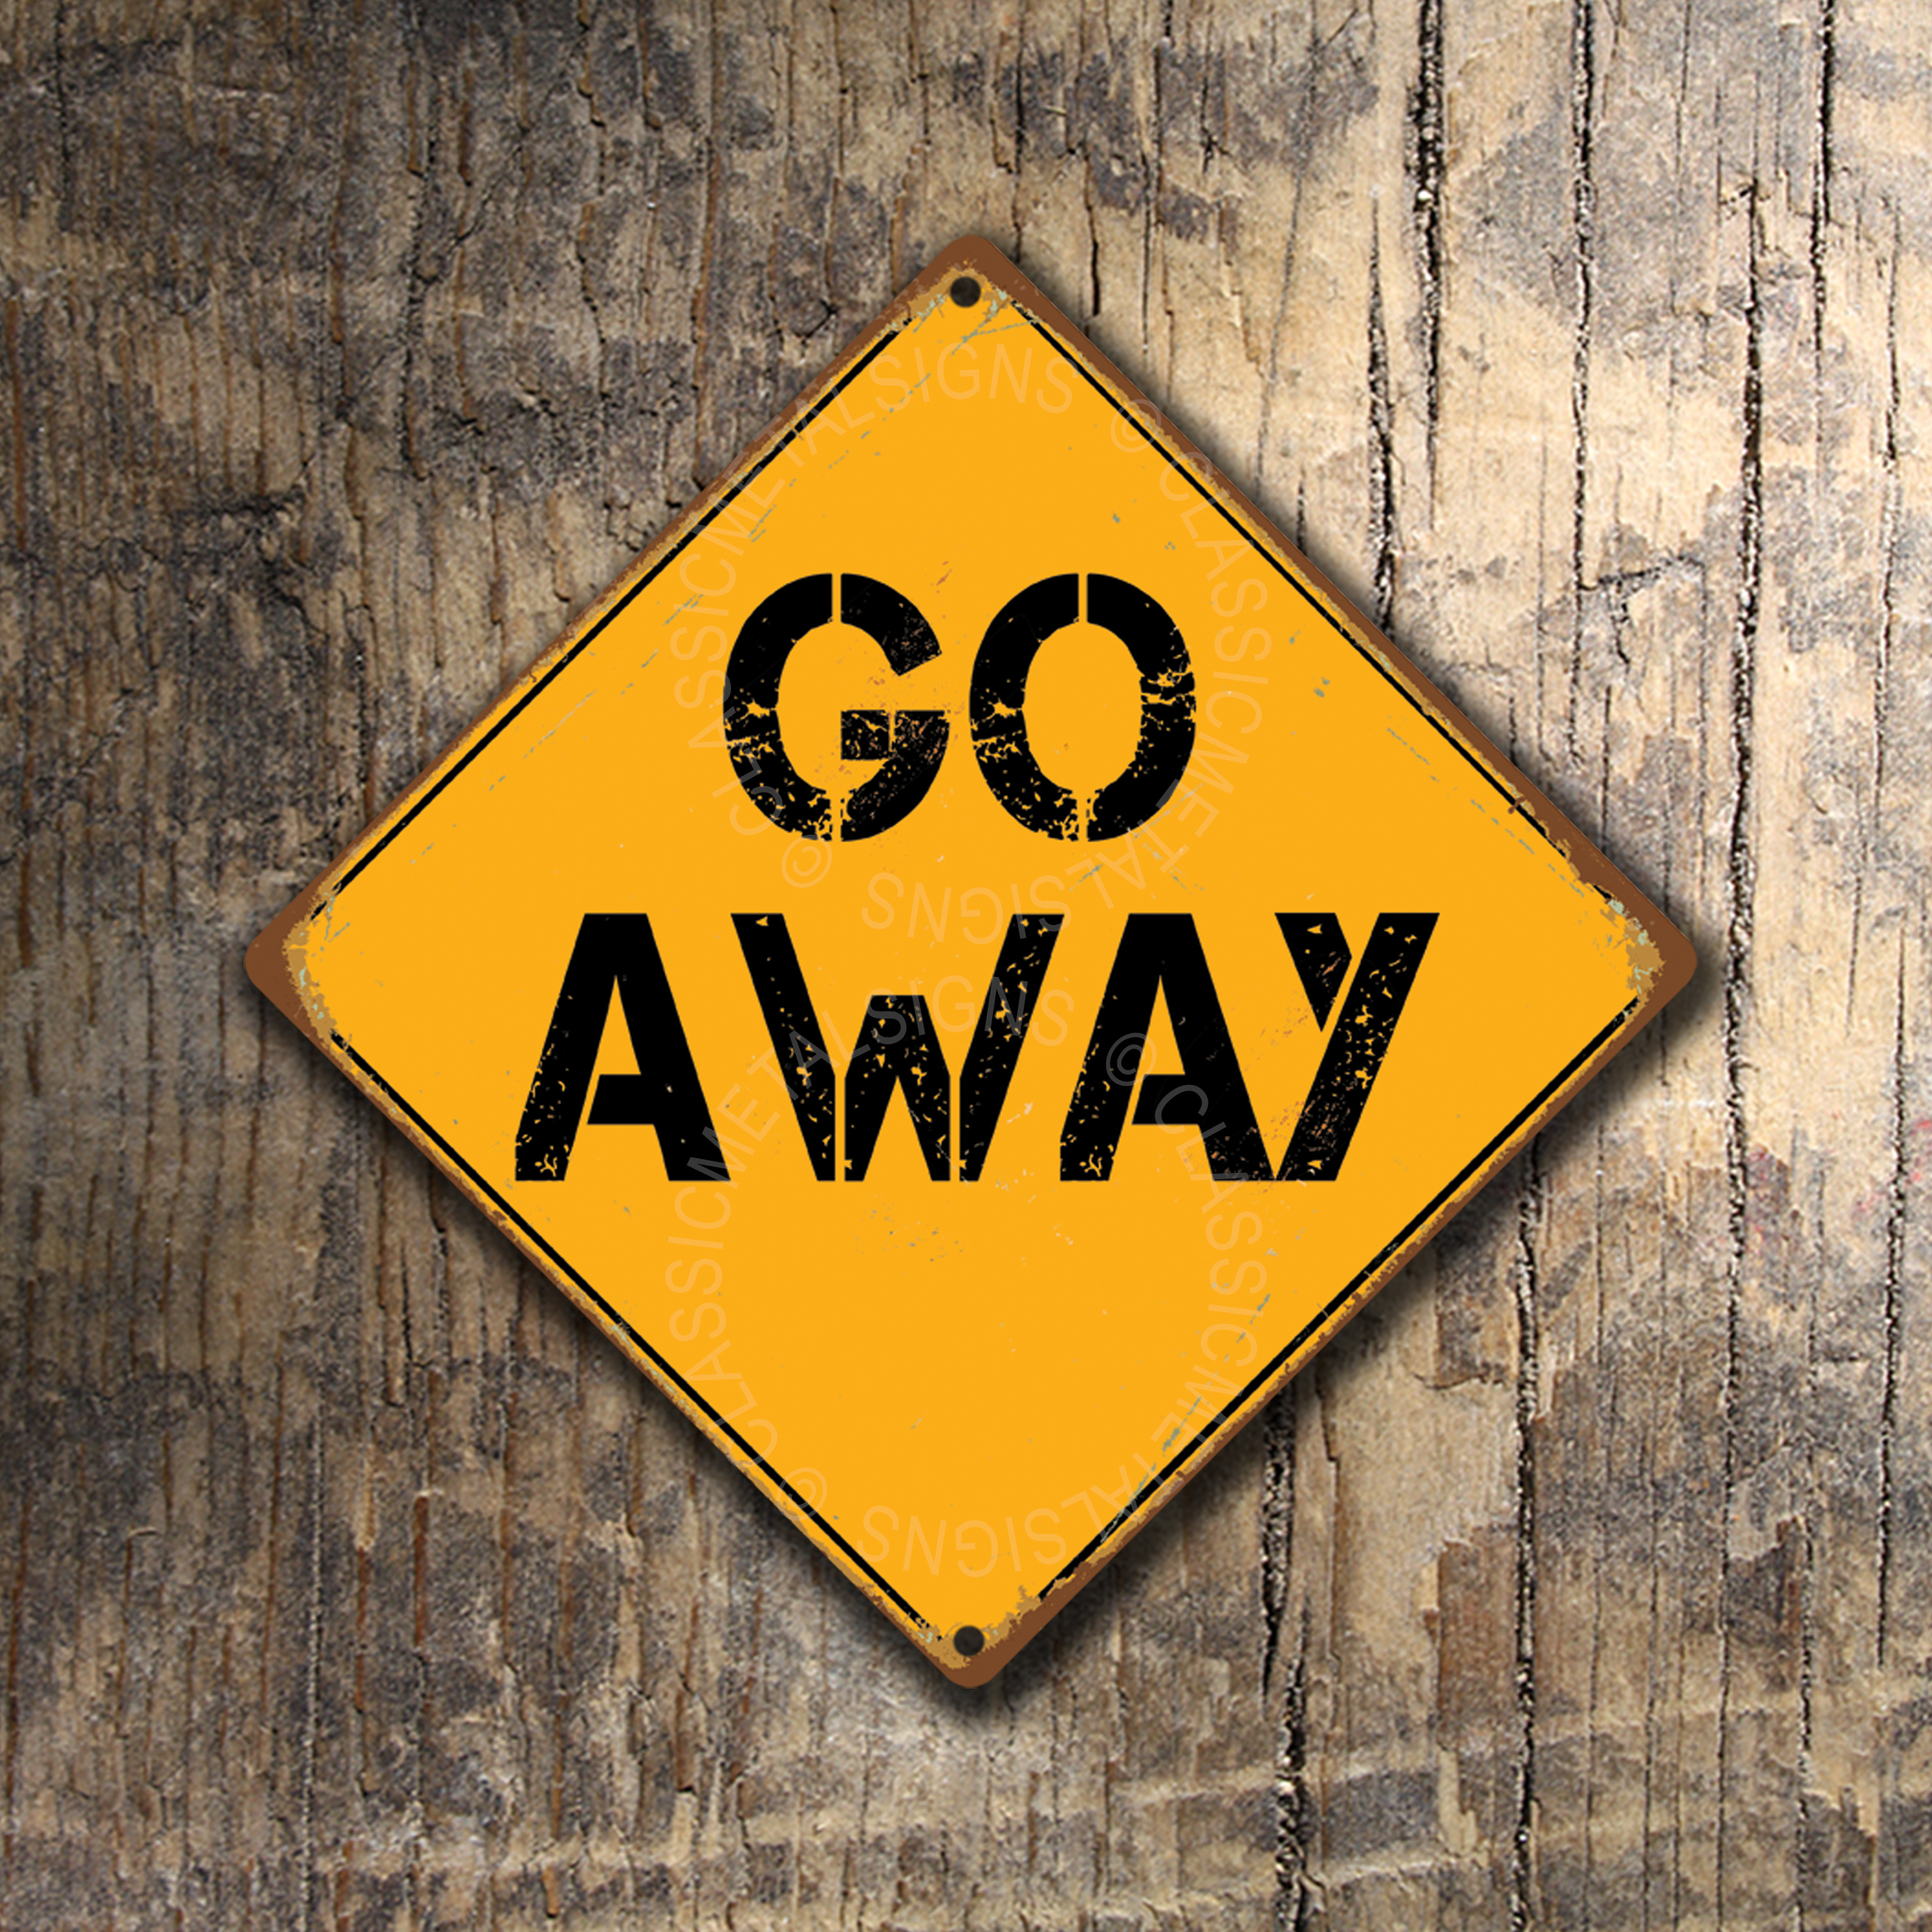 Go Away signs